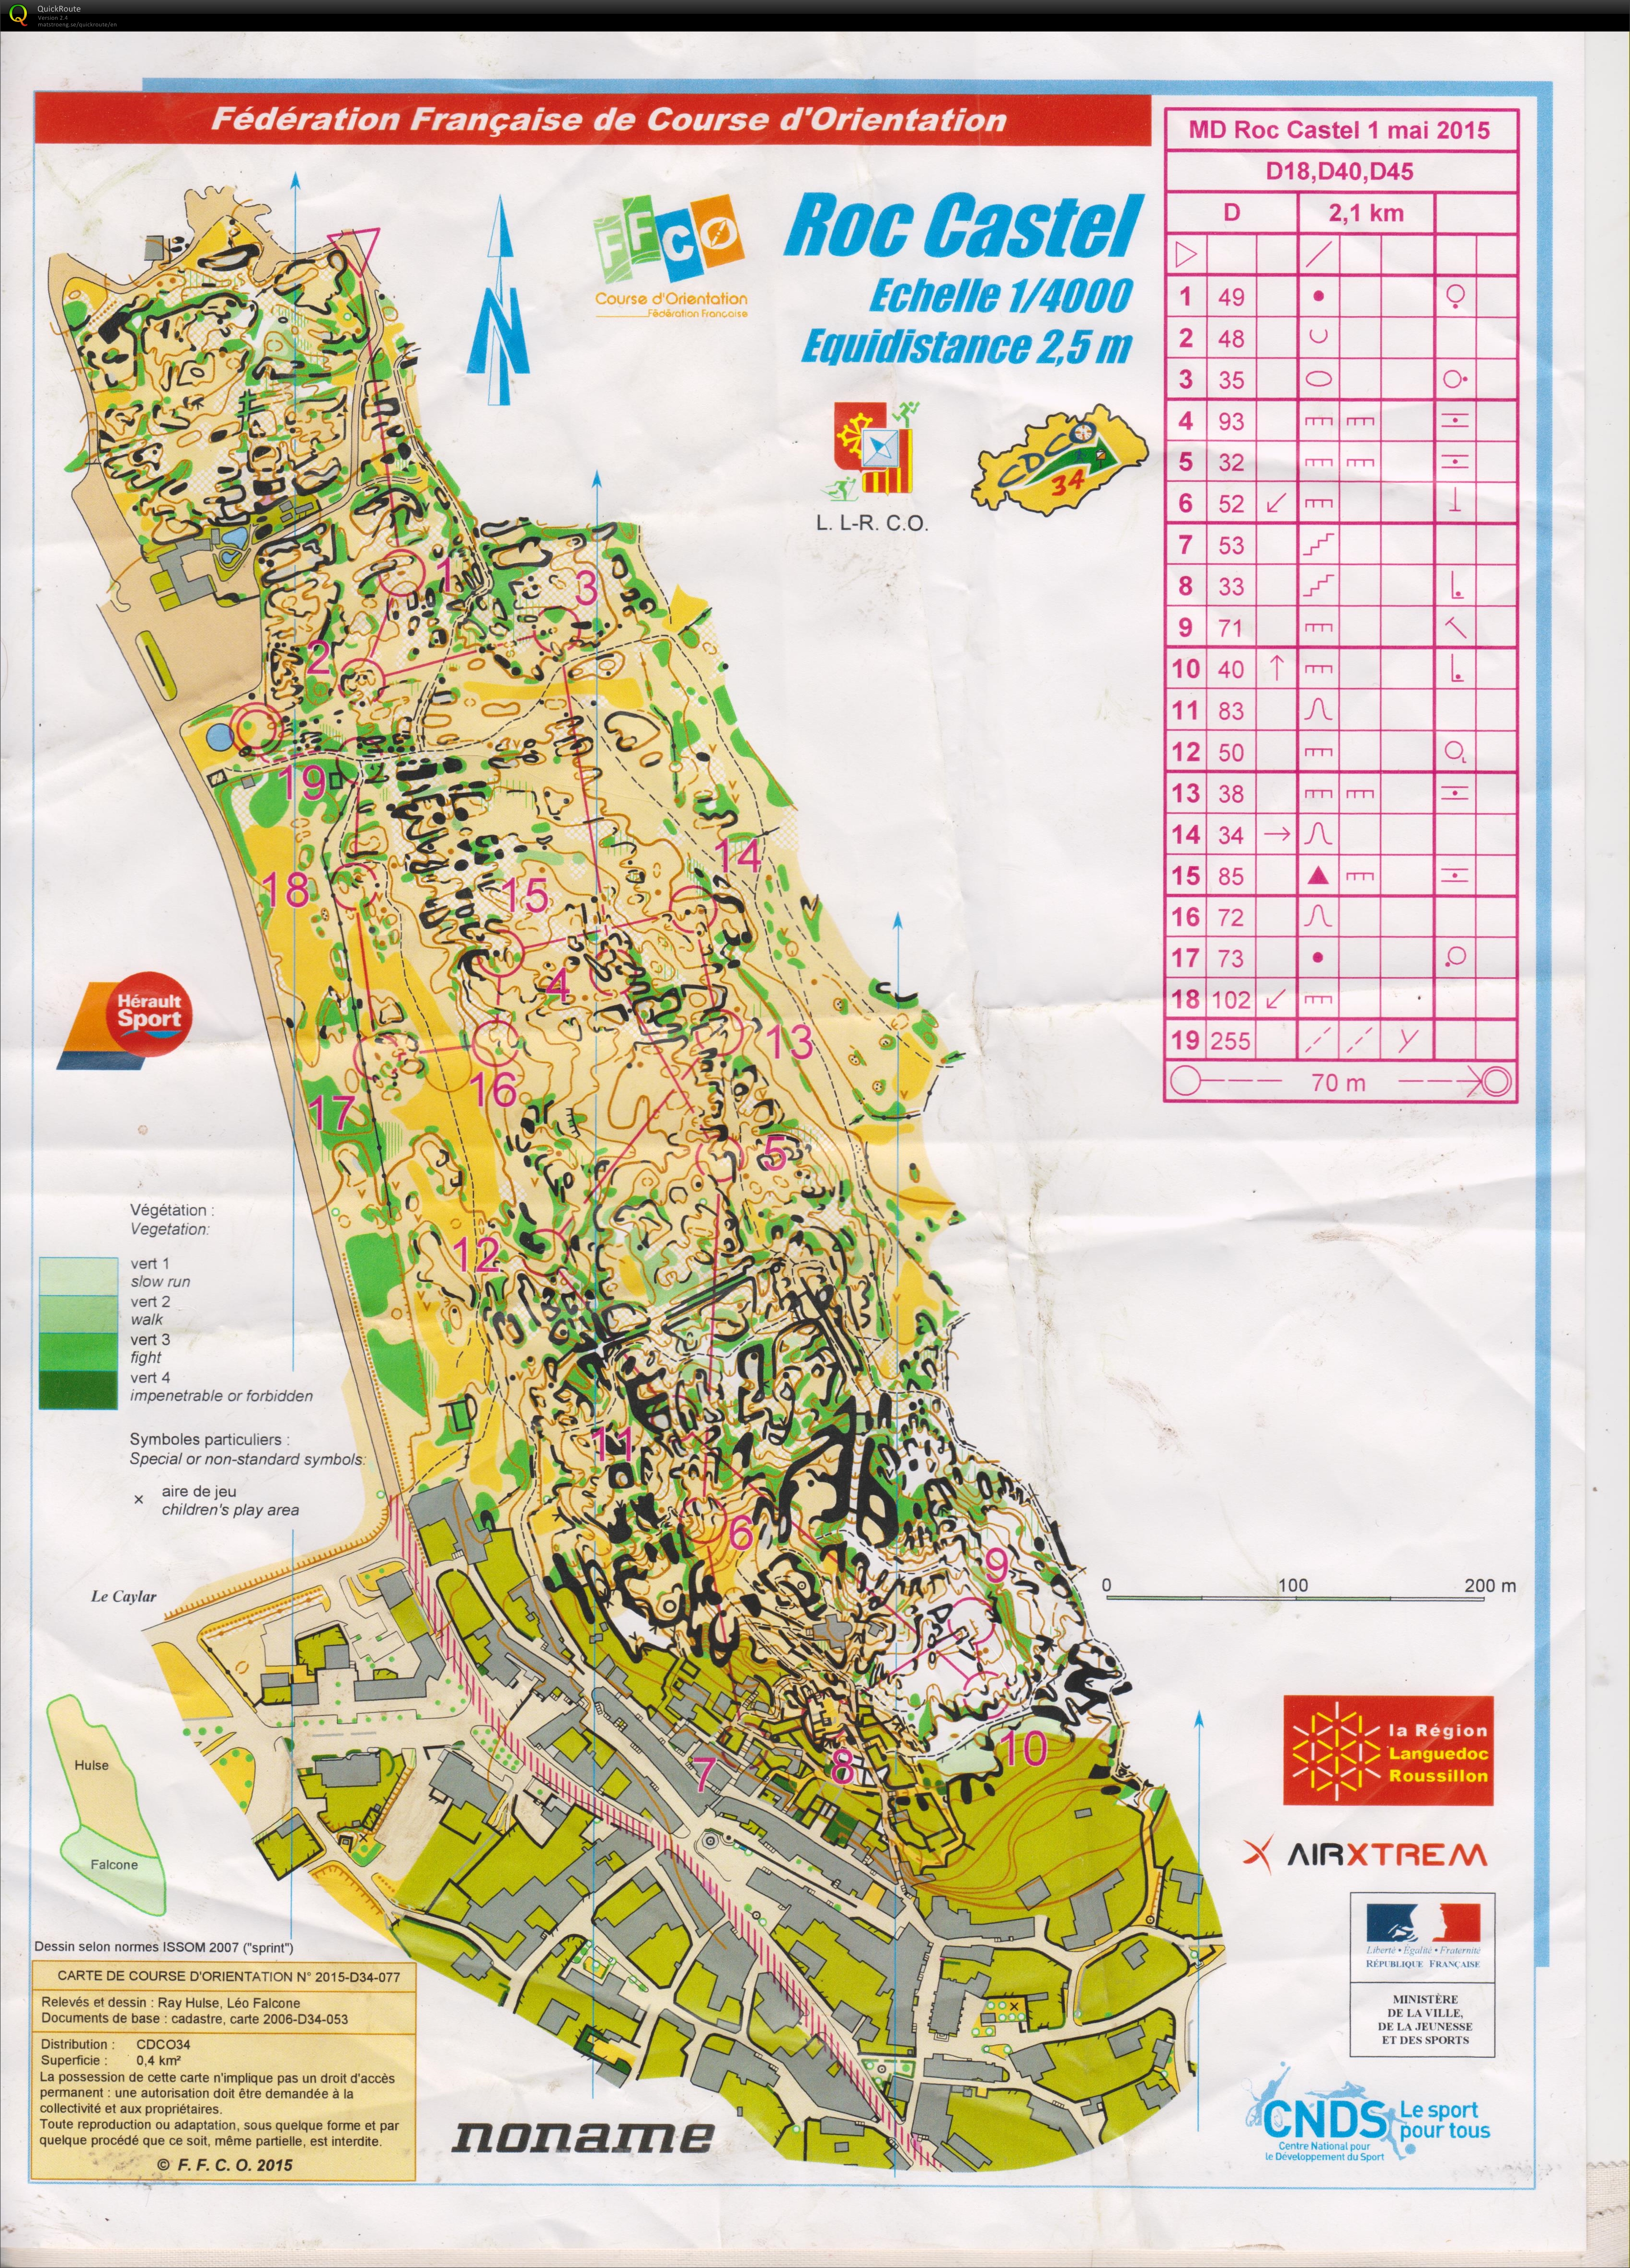 Nationale SO Larzac D18 - Day 1 - Le Caylar (01/05/2015)